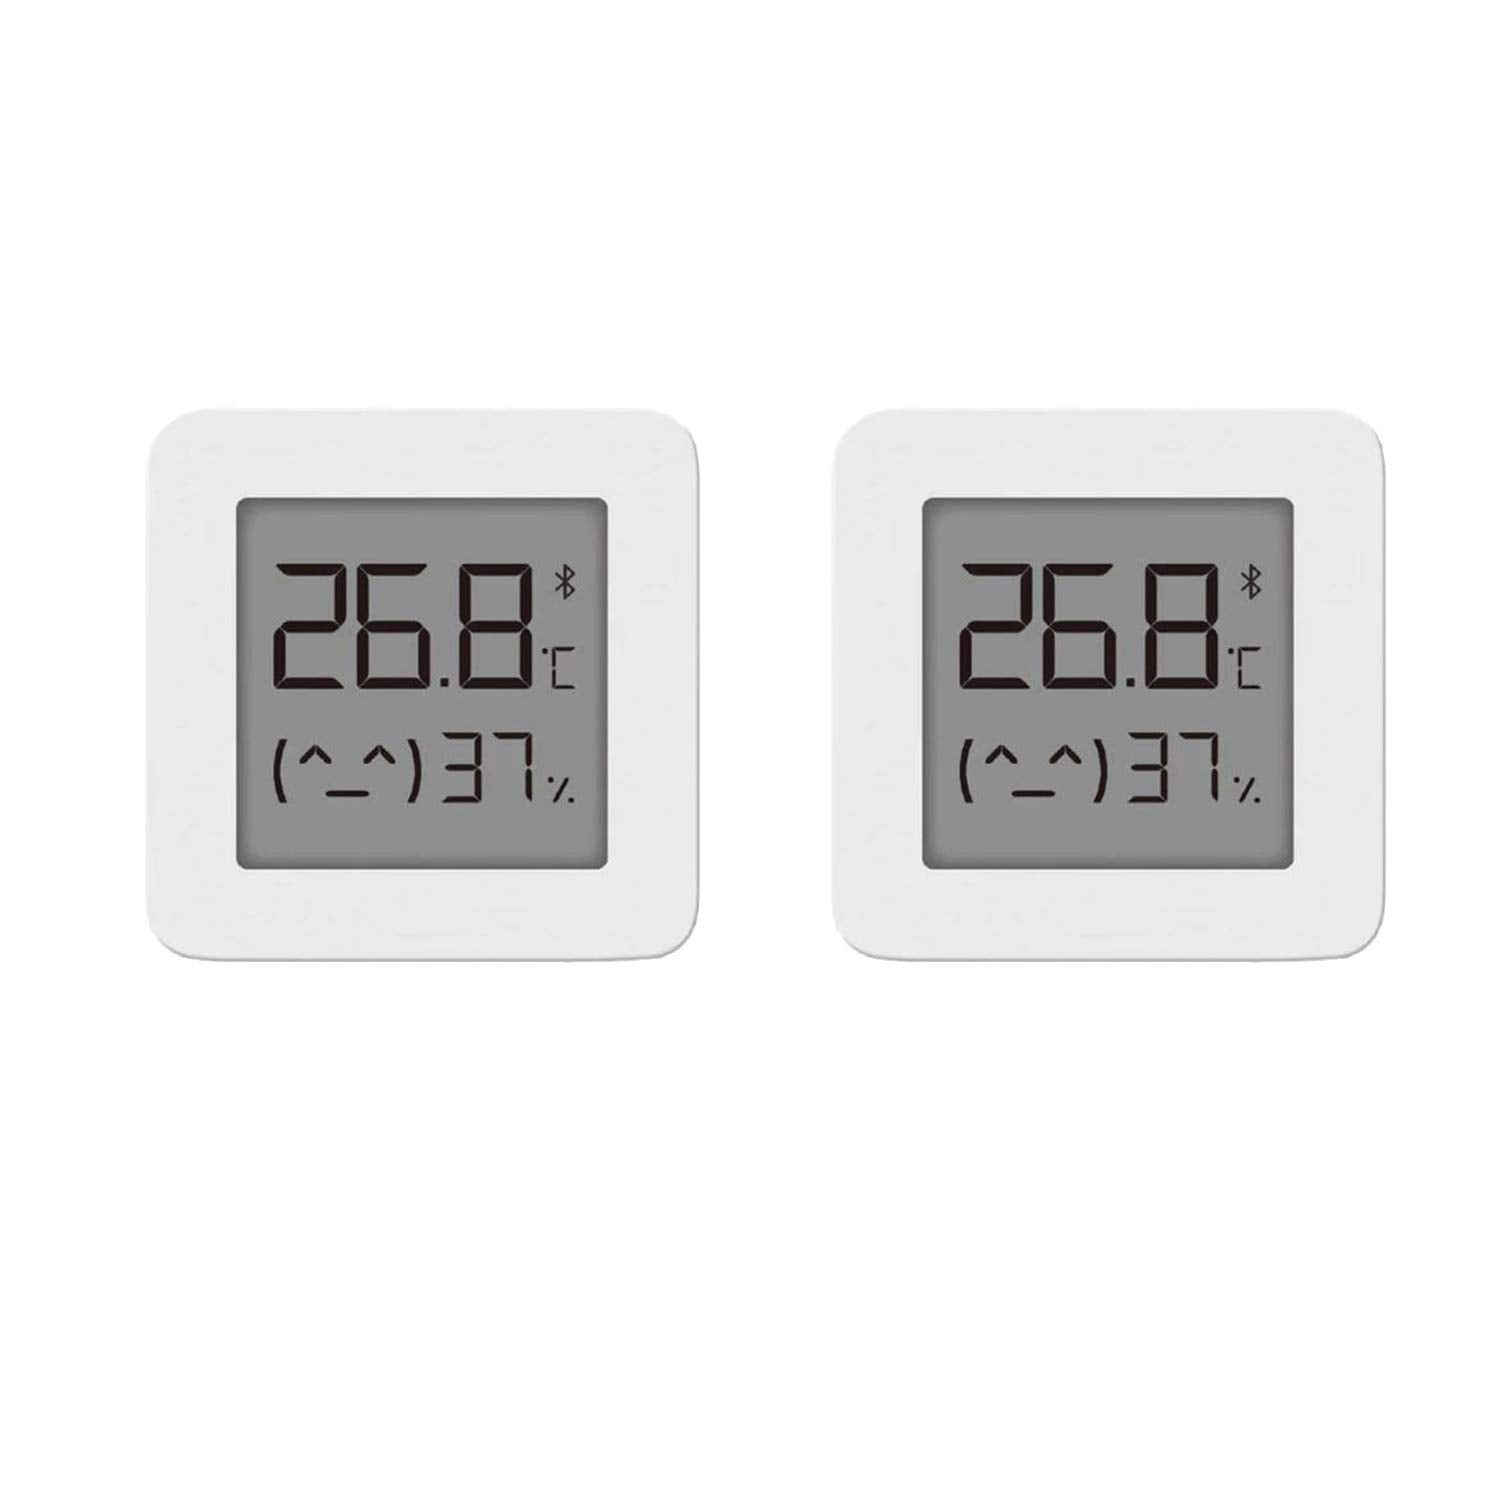 Details about   Digital LCD Bluetooth Thermometer Hygrometer Temperature Humidity Clock S 